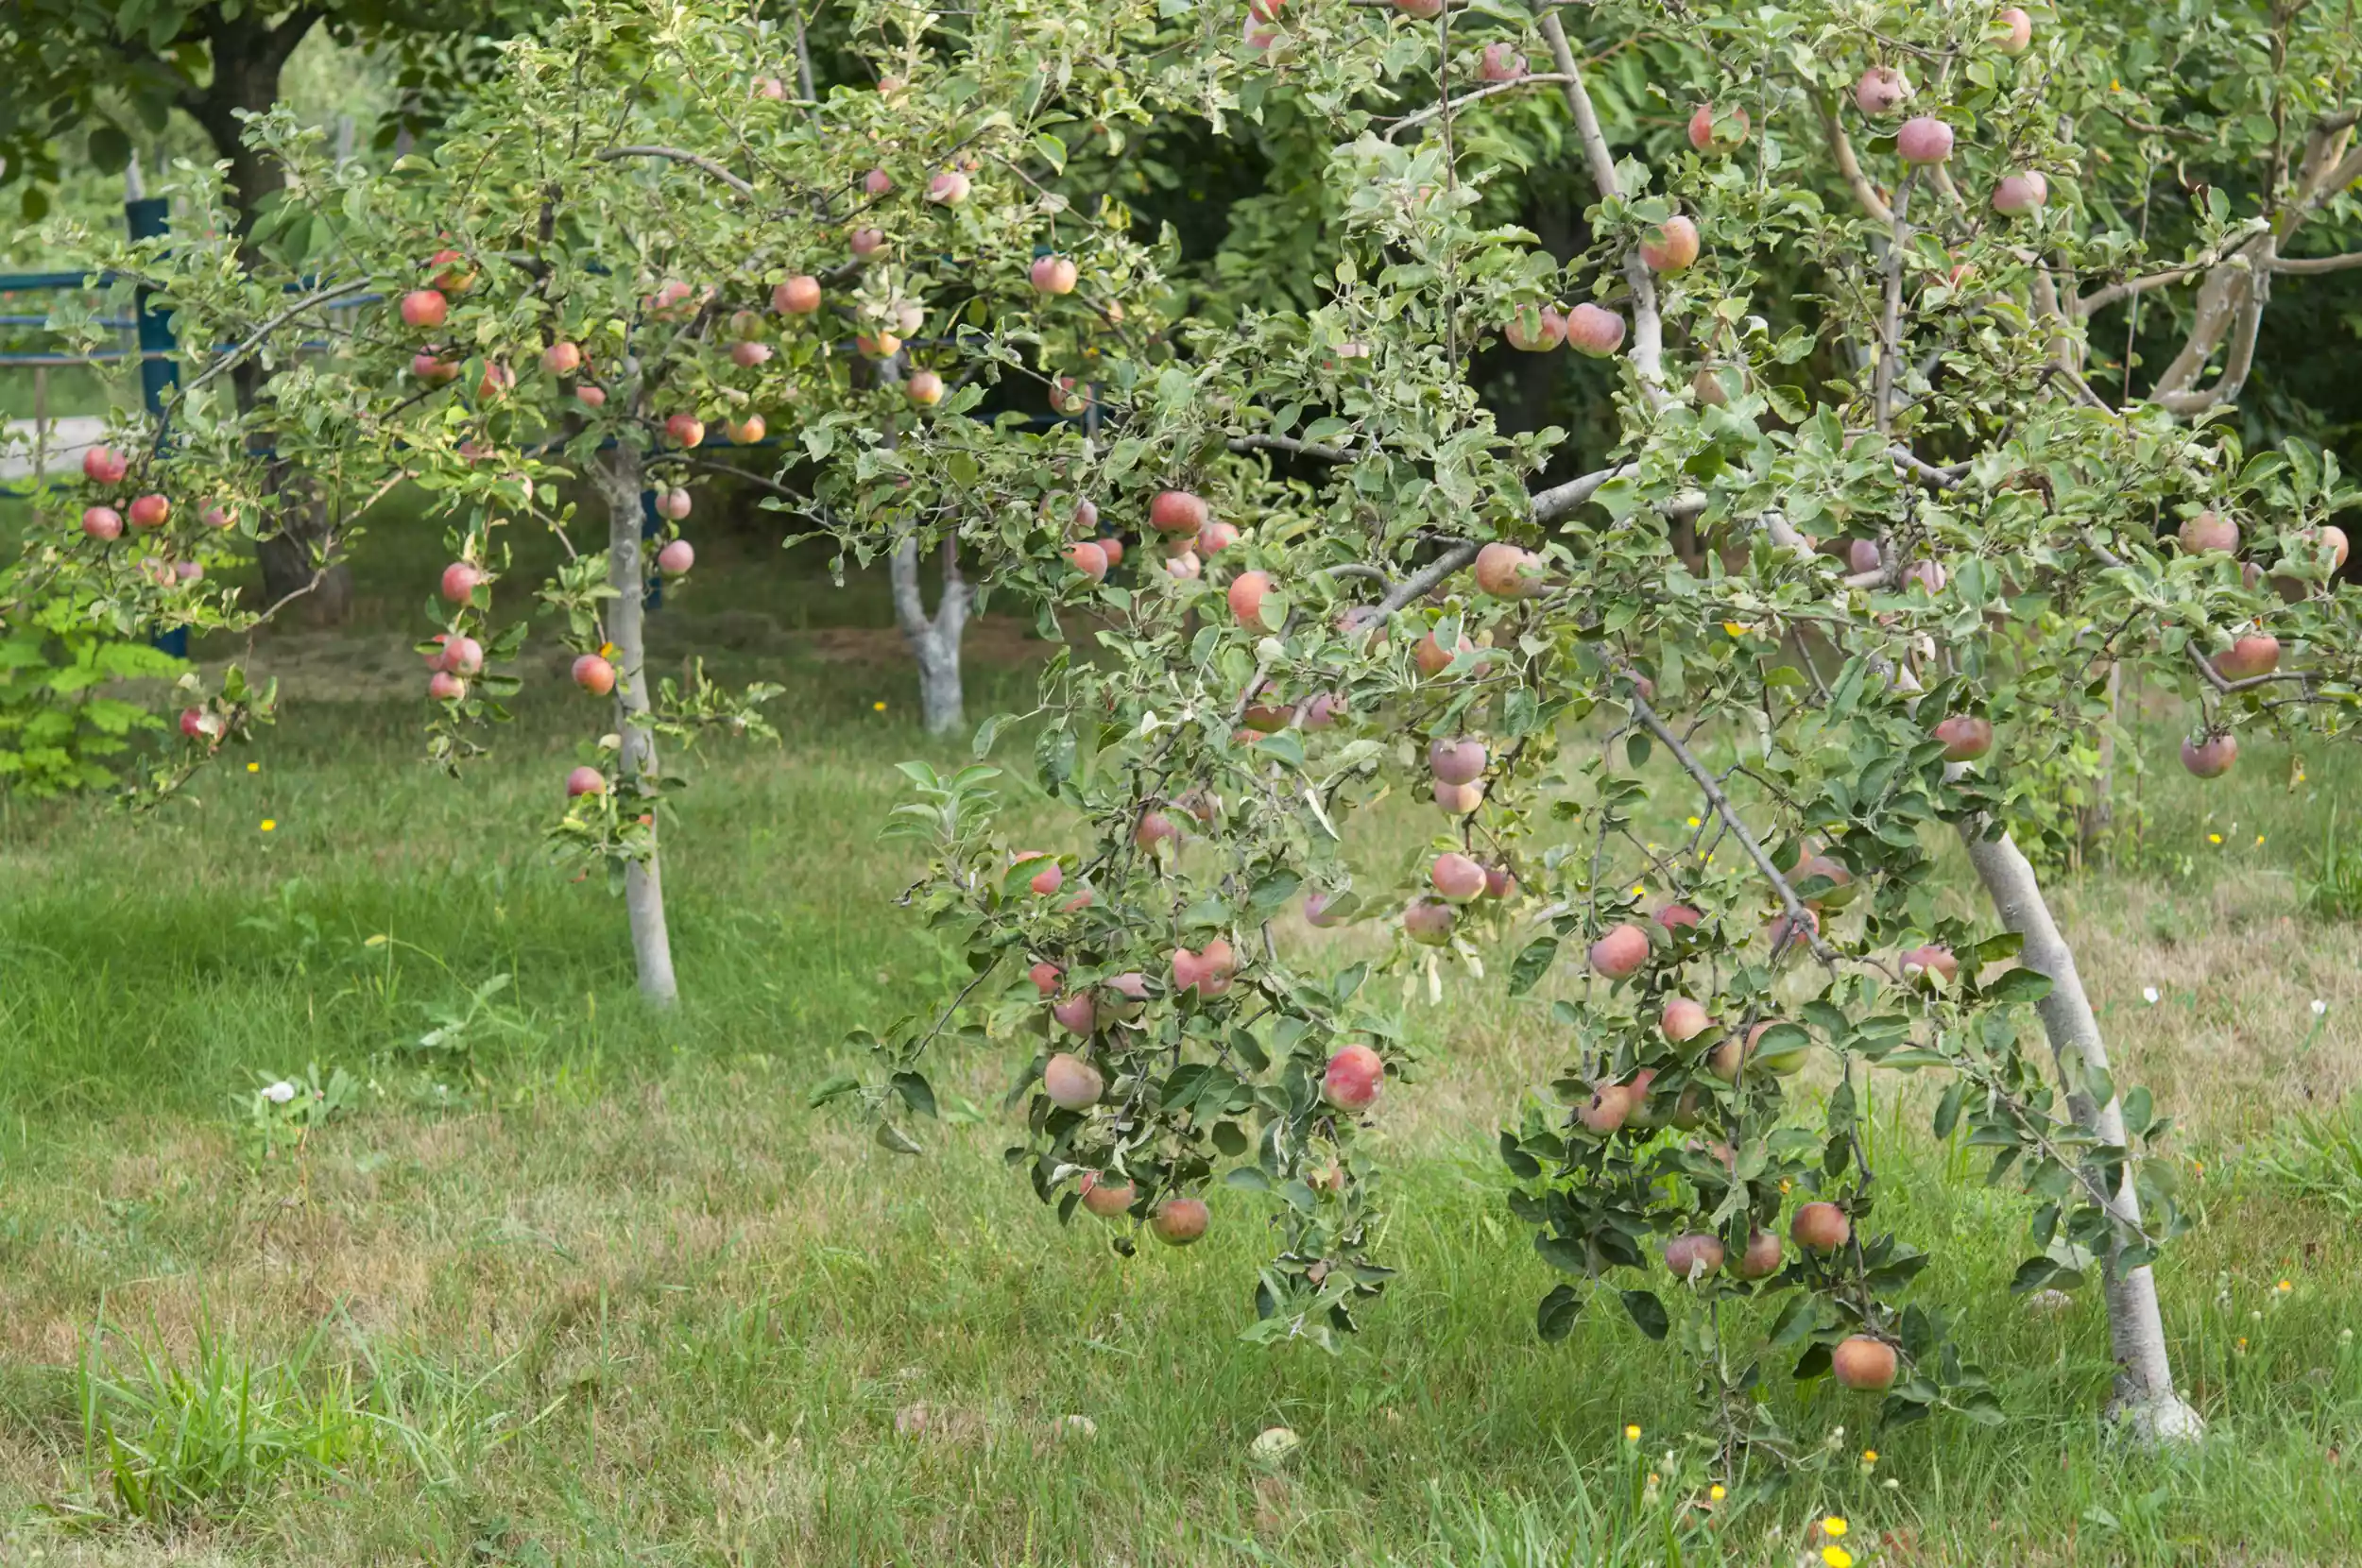 Young dwarf apple trees in a yard, heavy with fruit.